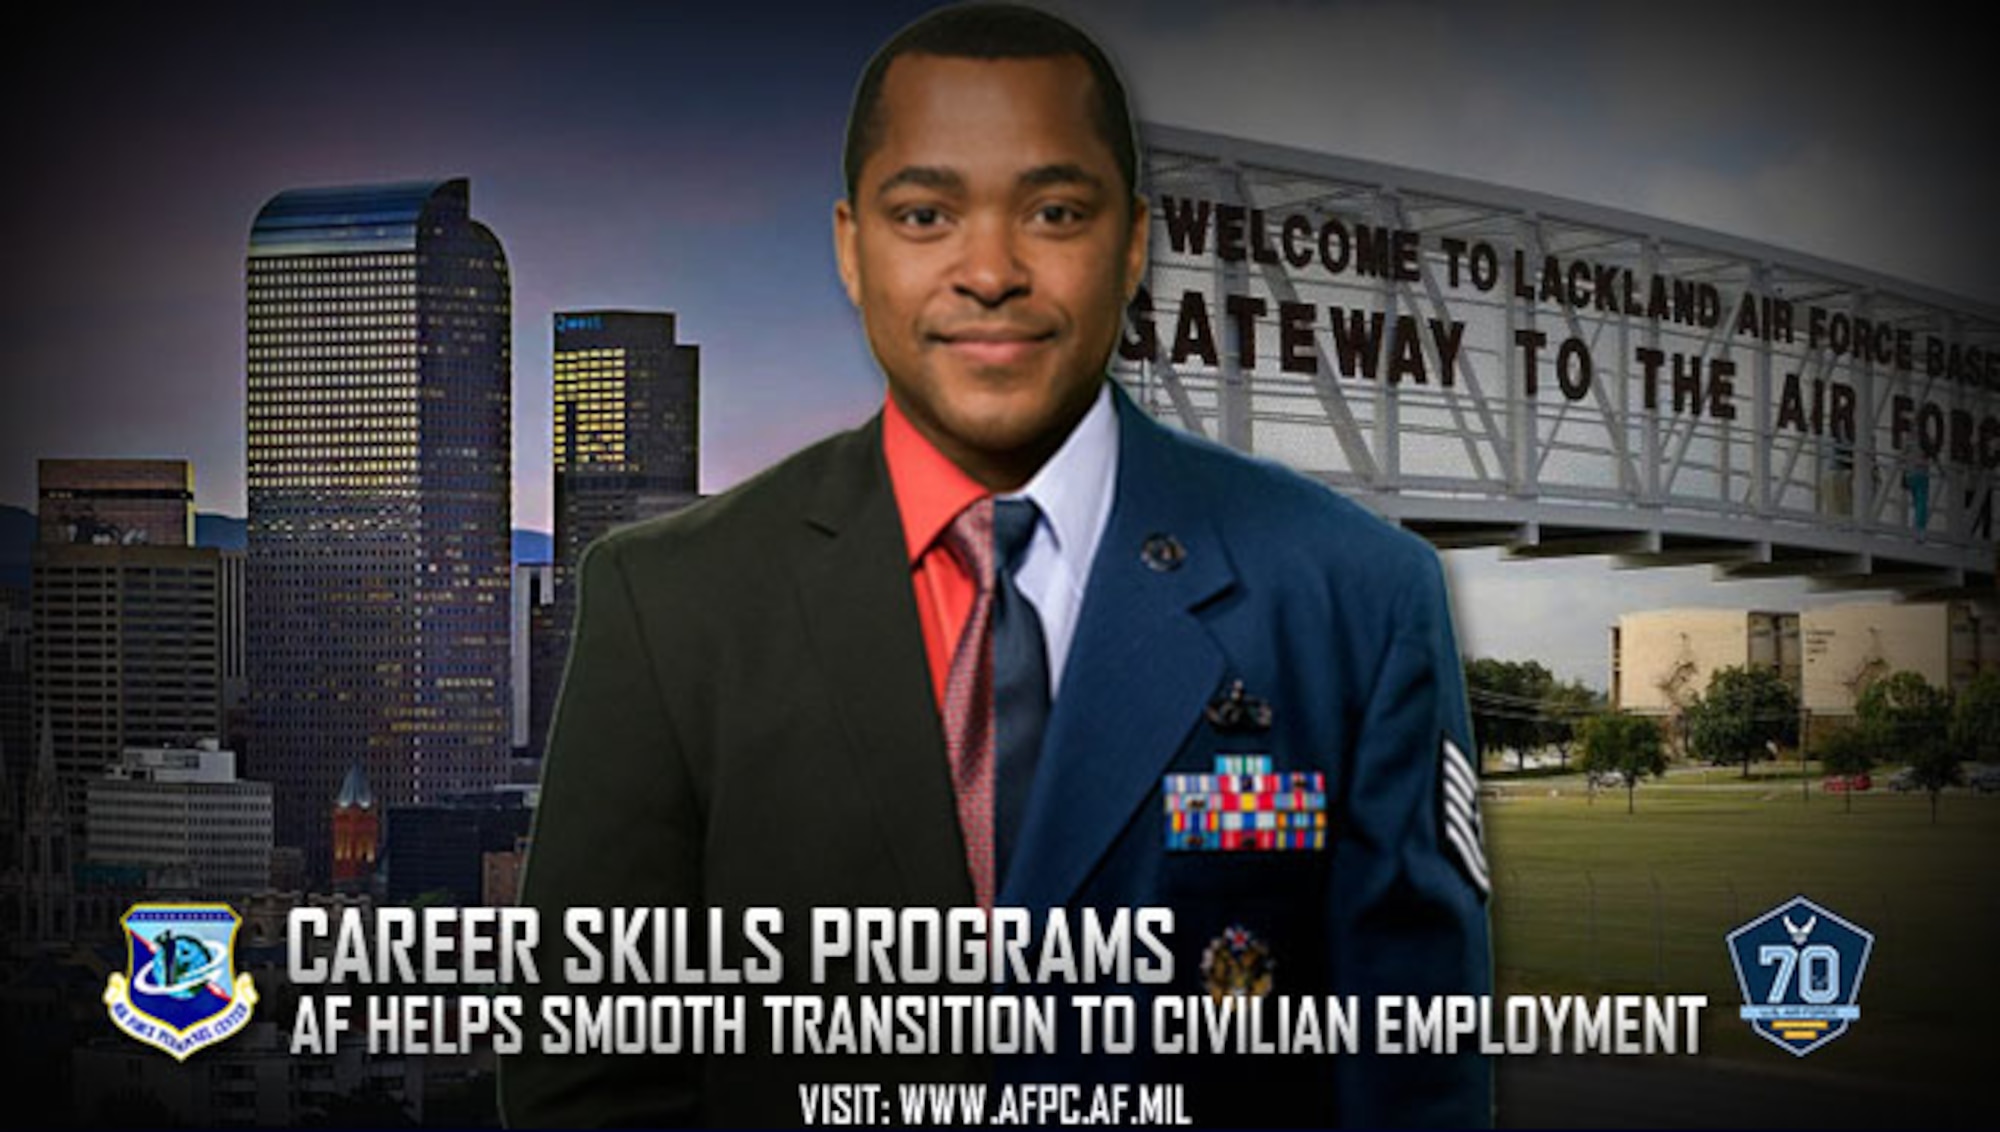 Airmen who meet certain qualifications can participate in civilian job and employment training, including apprenticeships and internships, starting up to six months prior to their separation or retirement via the Career Skills Program. (U.S. Air Force graphic by Staff Sgt. Alexx Pons)